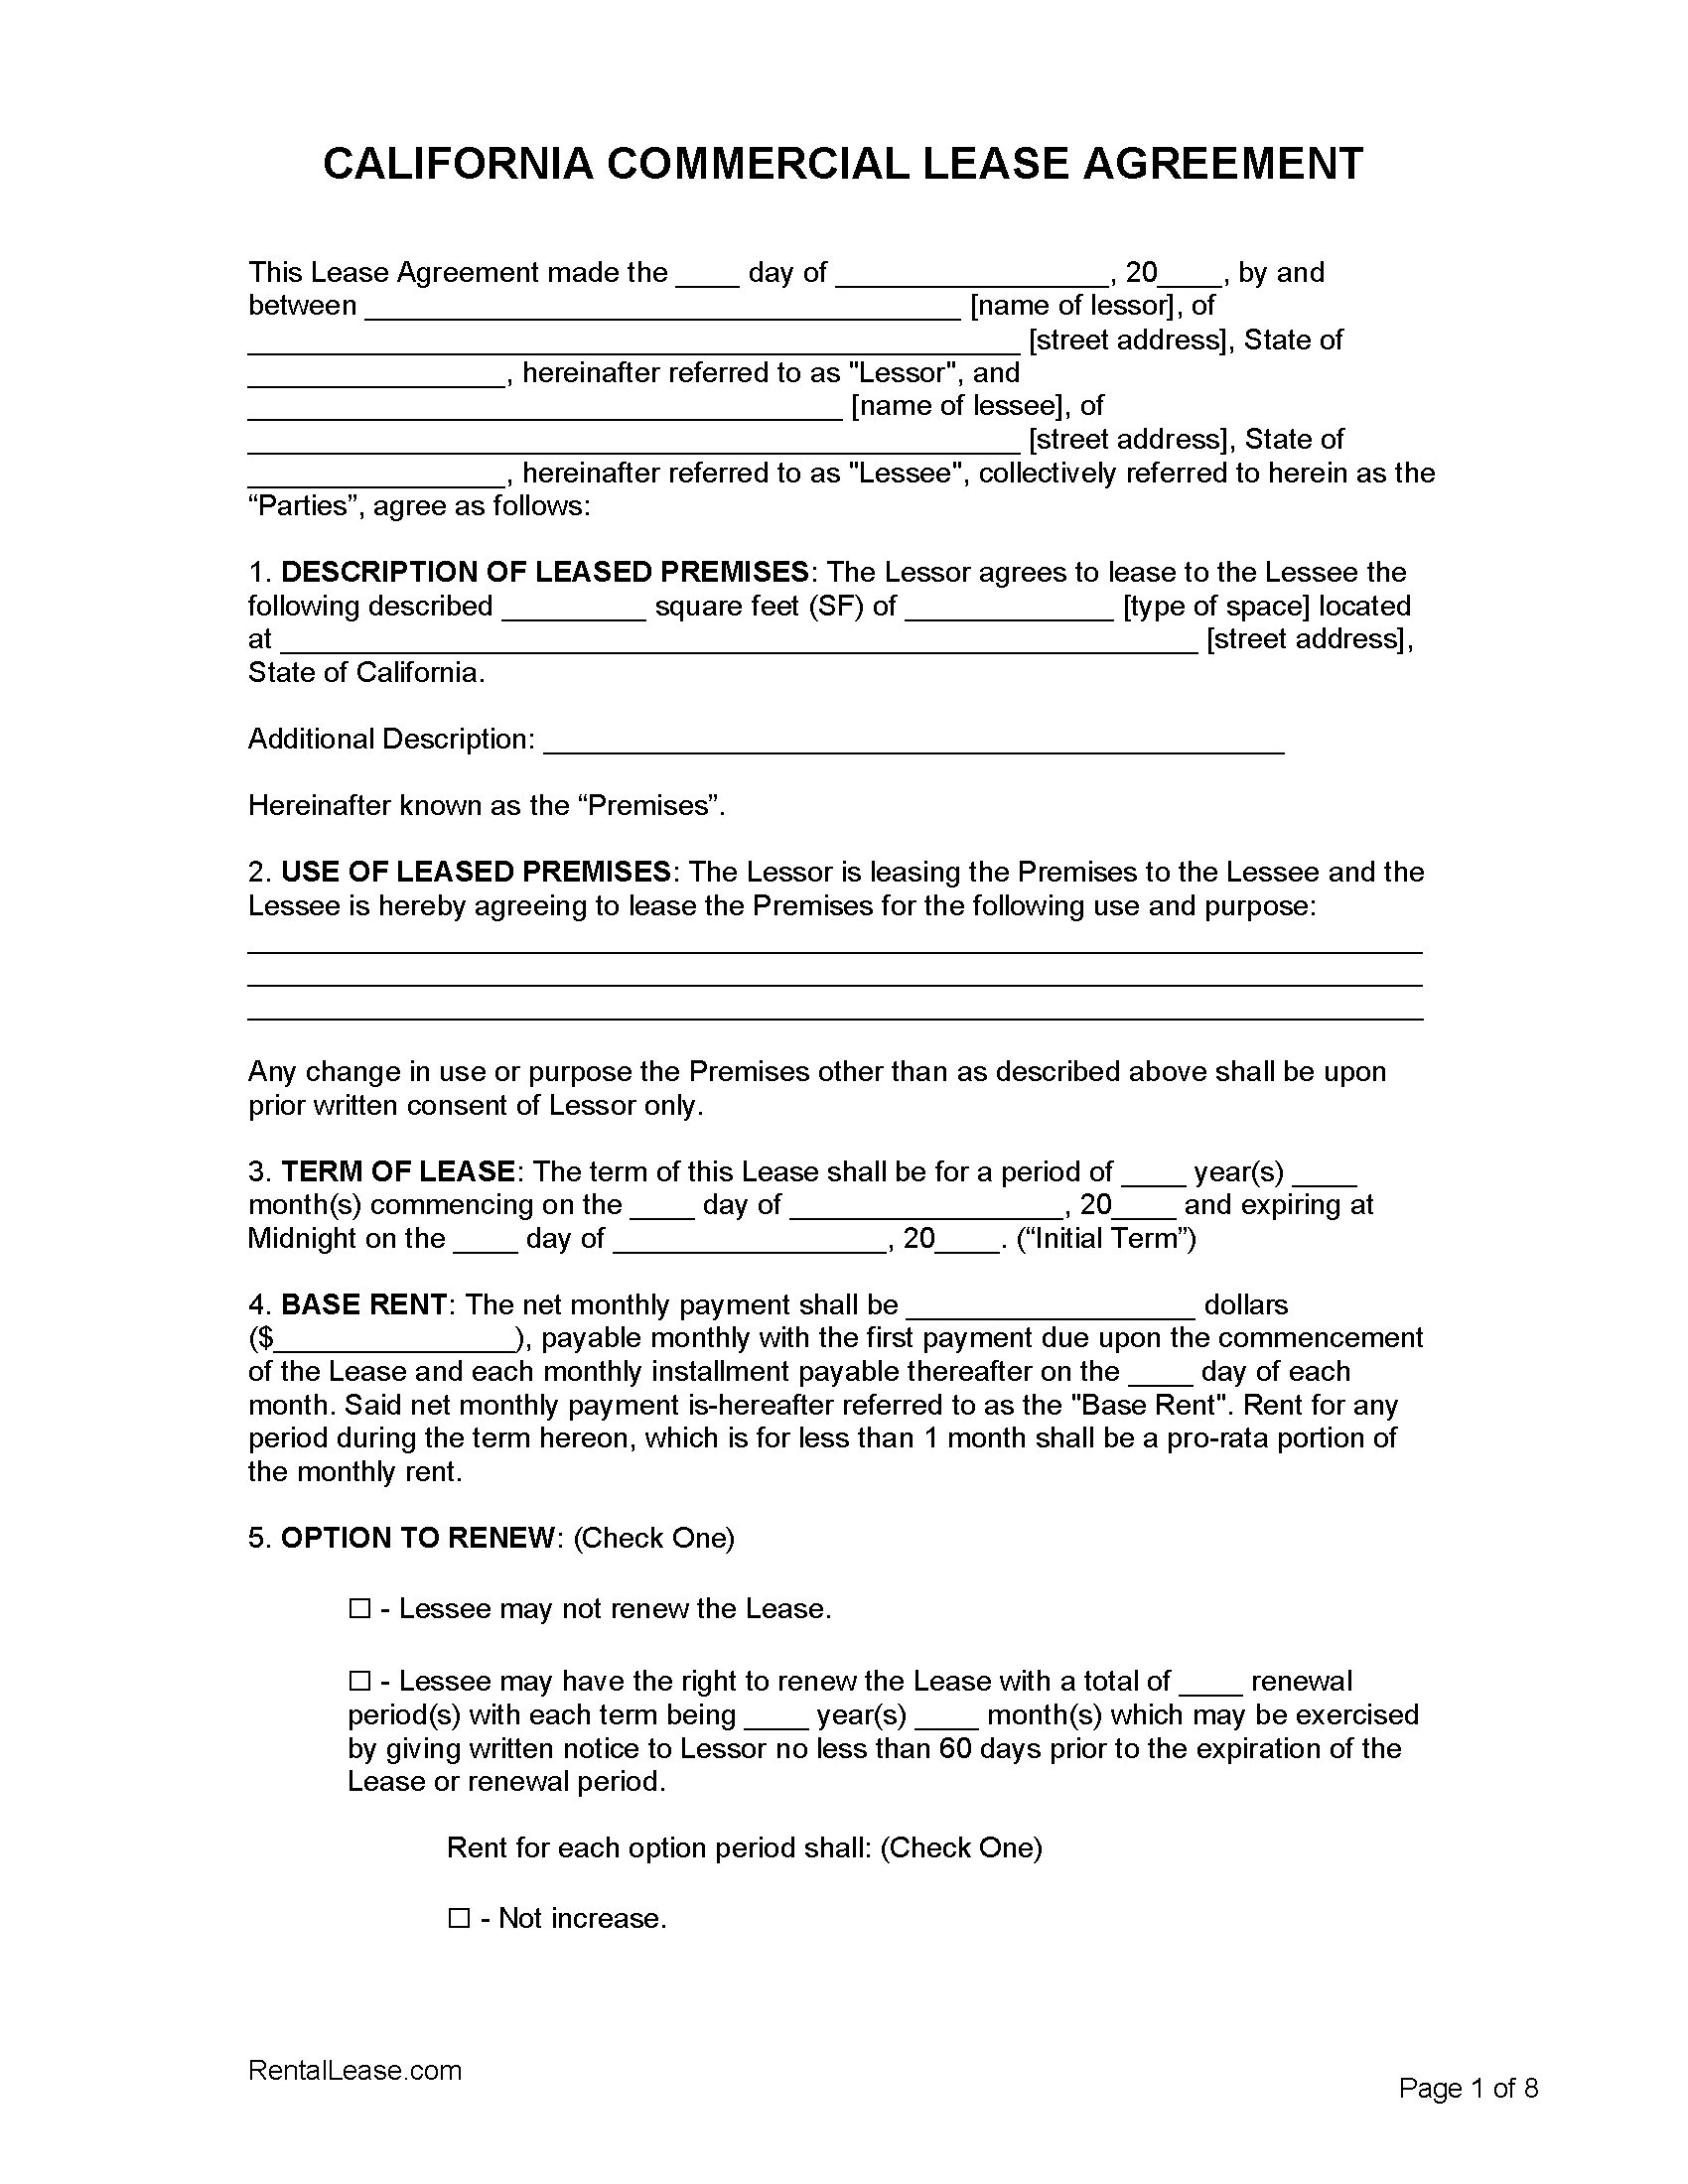 Free California Commercial Lease Agreement Template  PDF  Word Throughout sublease commercial agreement template